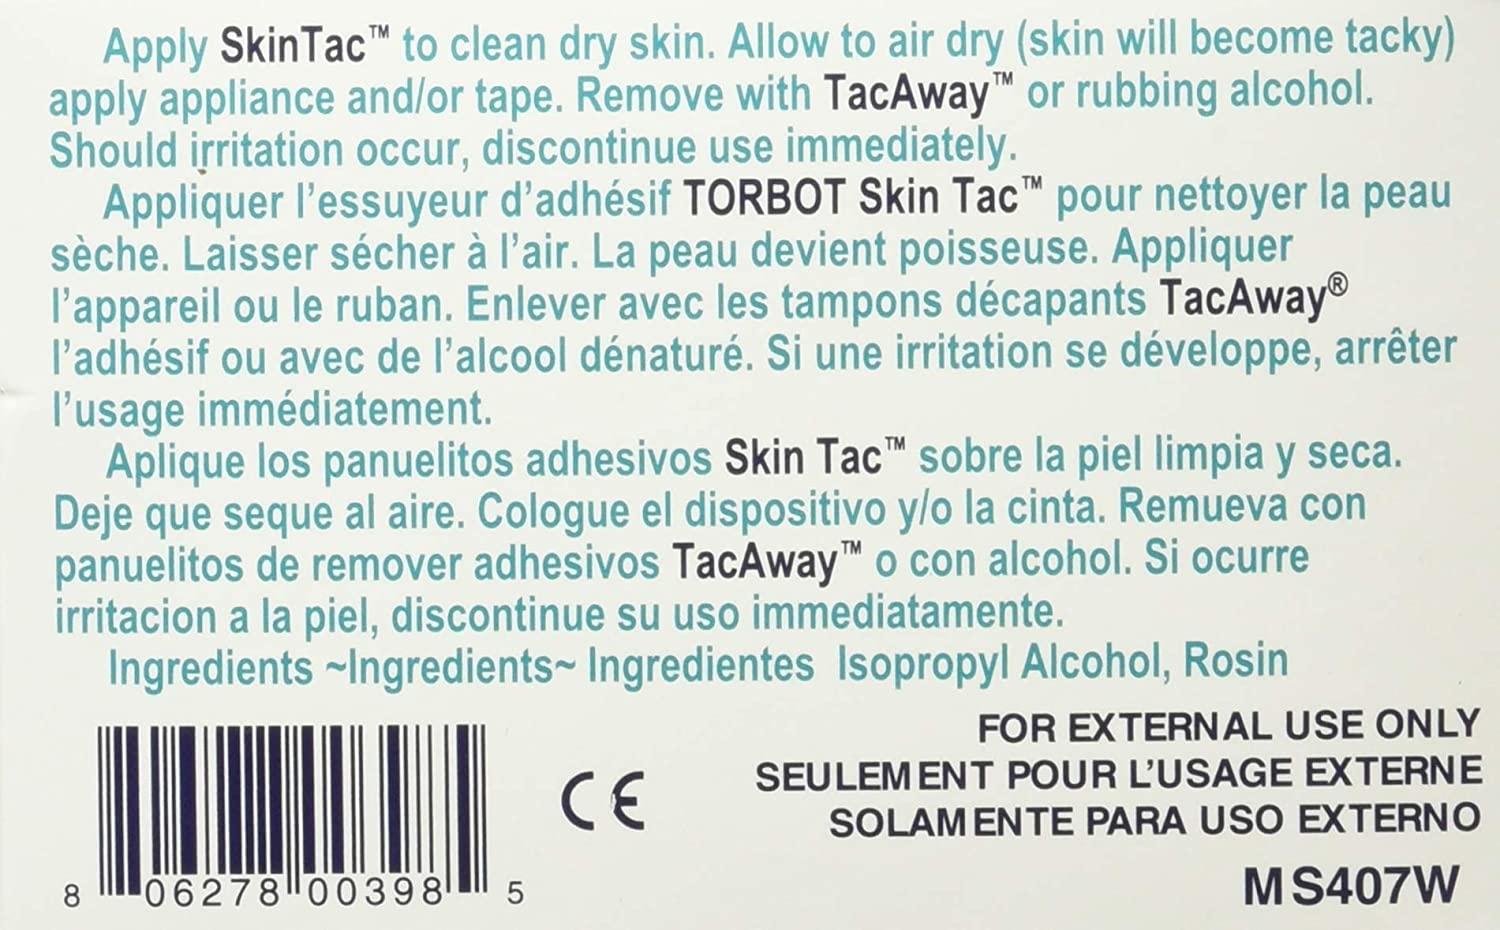 Torbot Group Inc Skin Tac H Adhesive Barrier Prep Wipe, Liquid Form, Latex-Free, Hypo-Allergenic (Box of 50 Each)